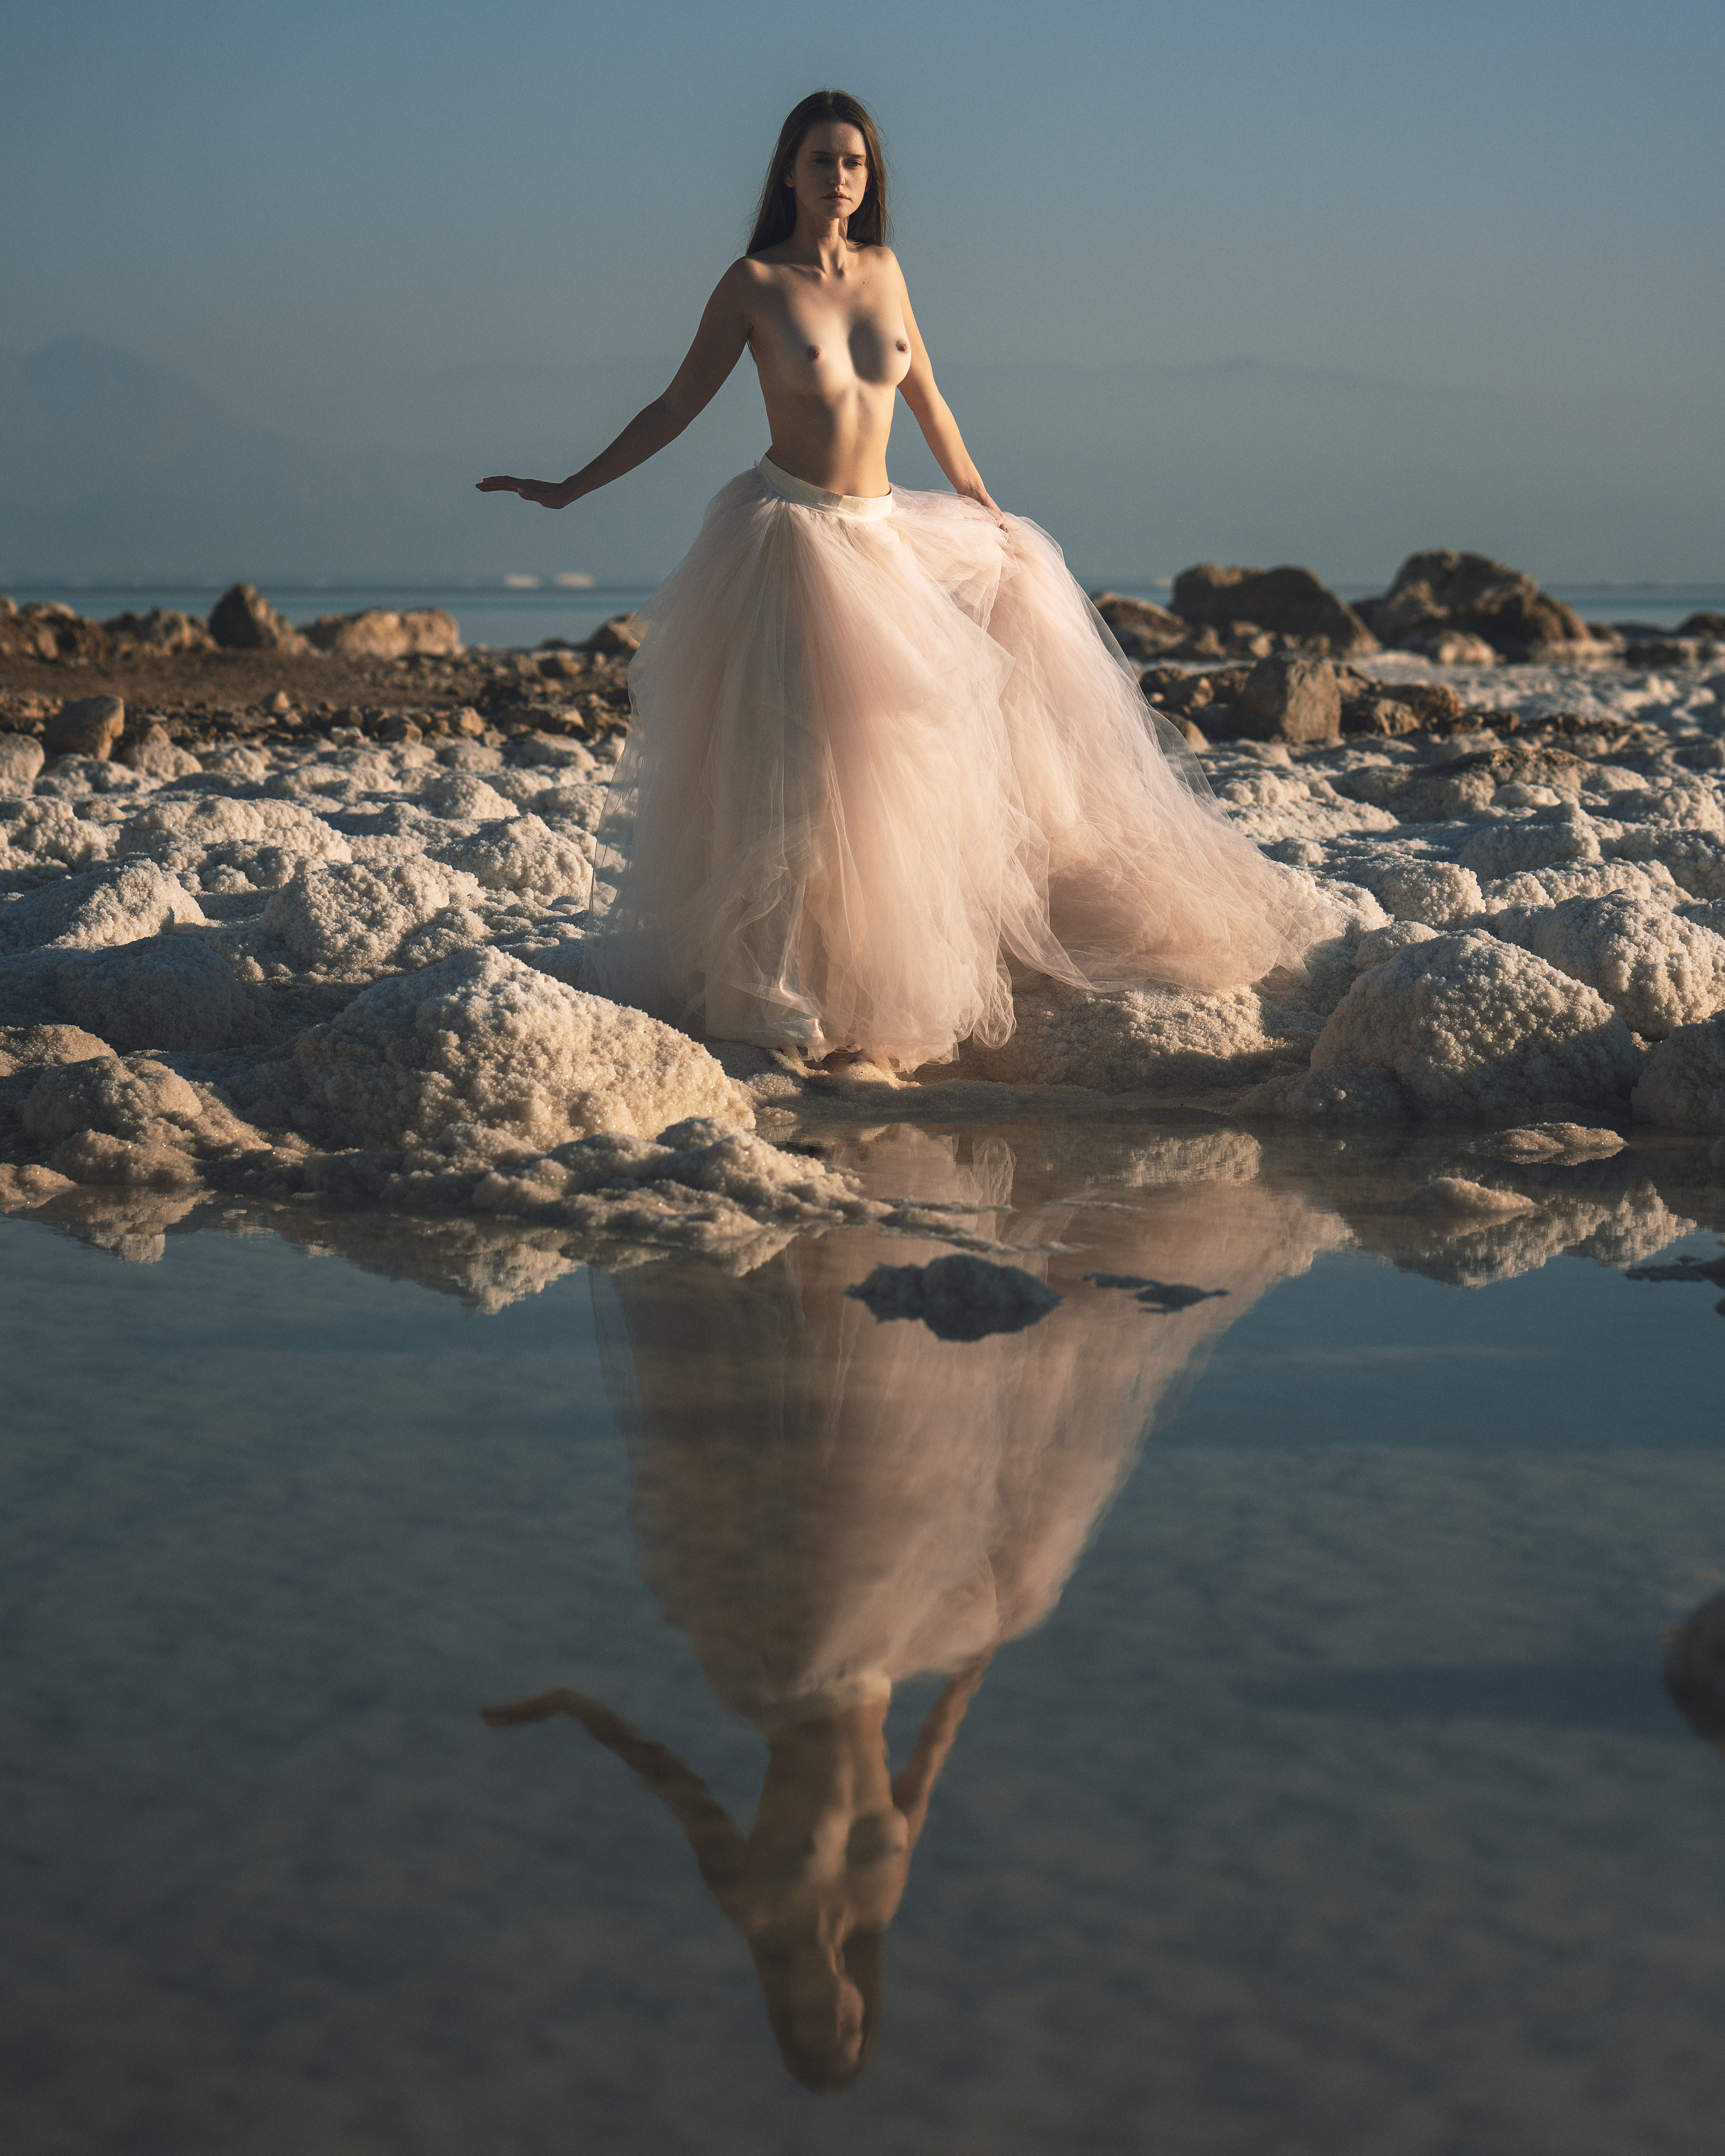 ball gown, beautiful woman, dead sea, desert, dreaminess, elegance, femininity, front view, golden hour, grace, looking, nude, one person, outdoors, reflections, rocks, salt, seductive women, sensuality, sky, standing, stones, sunset, water, young women, Alex Tsarfin